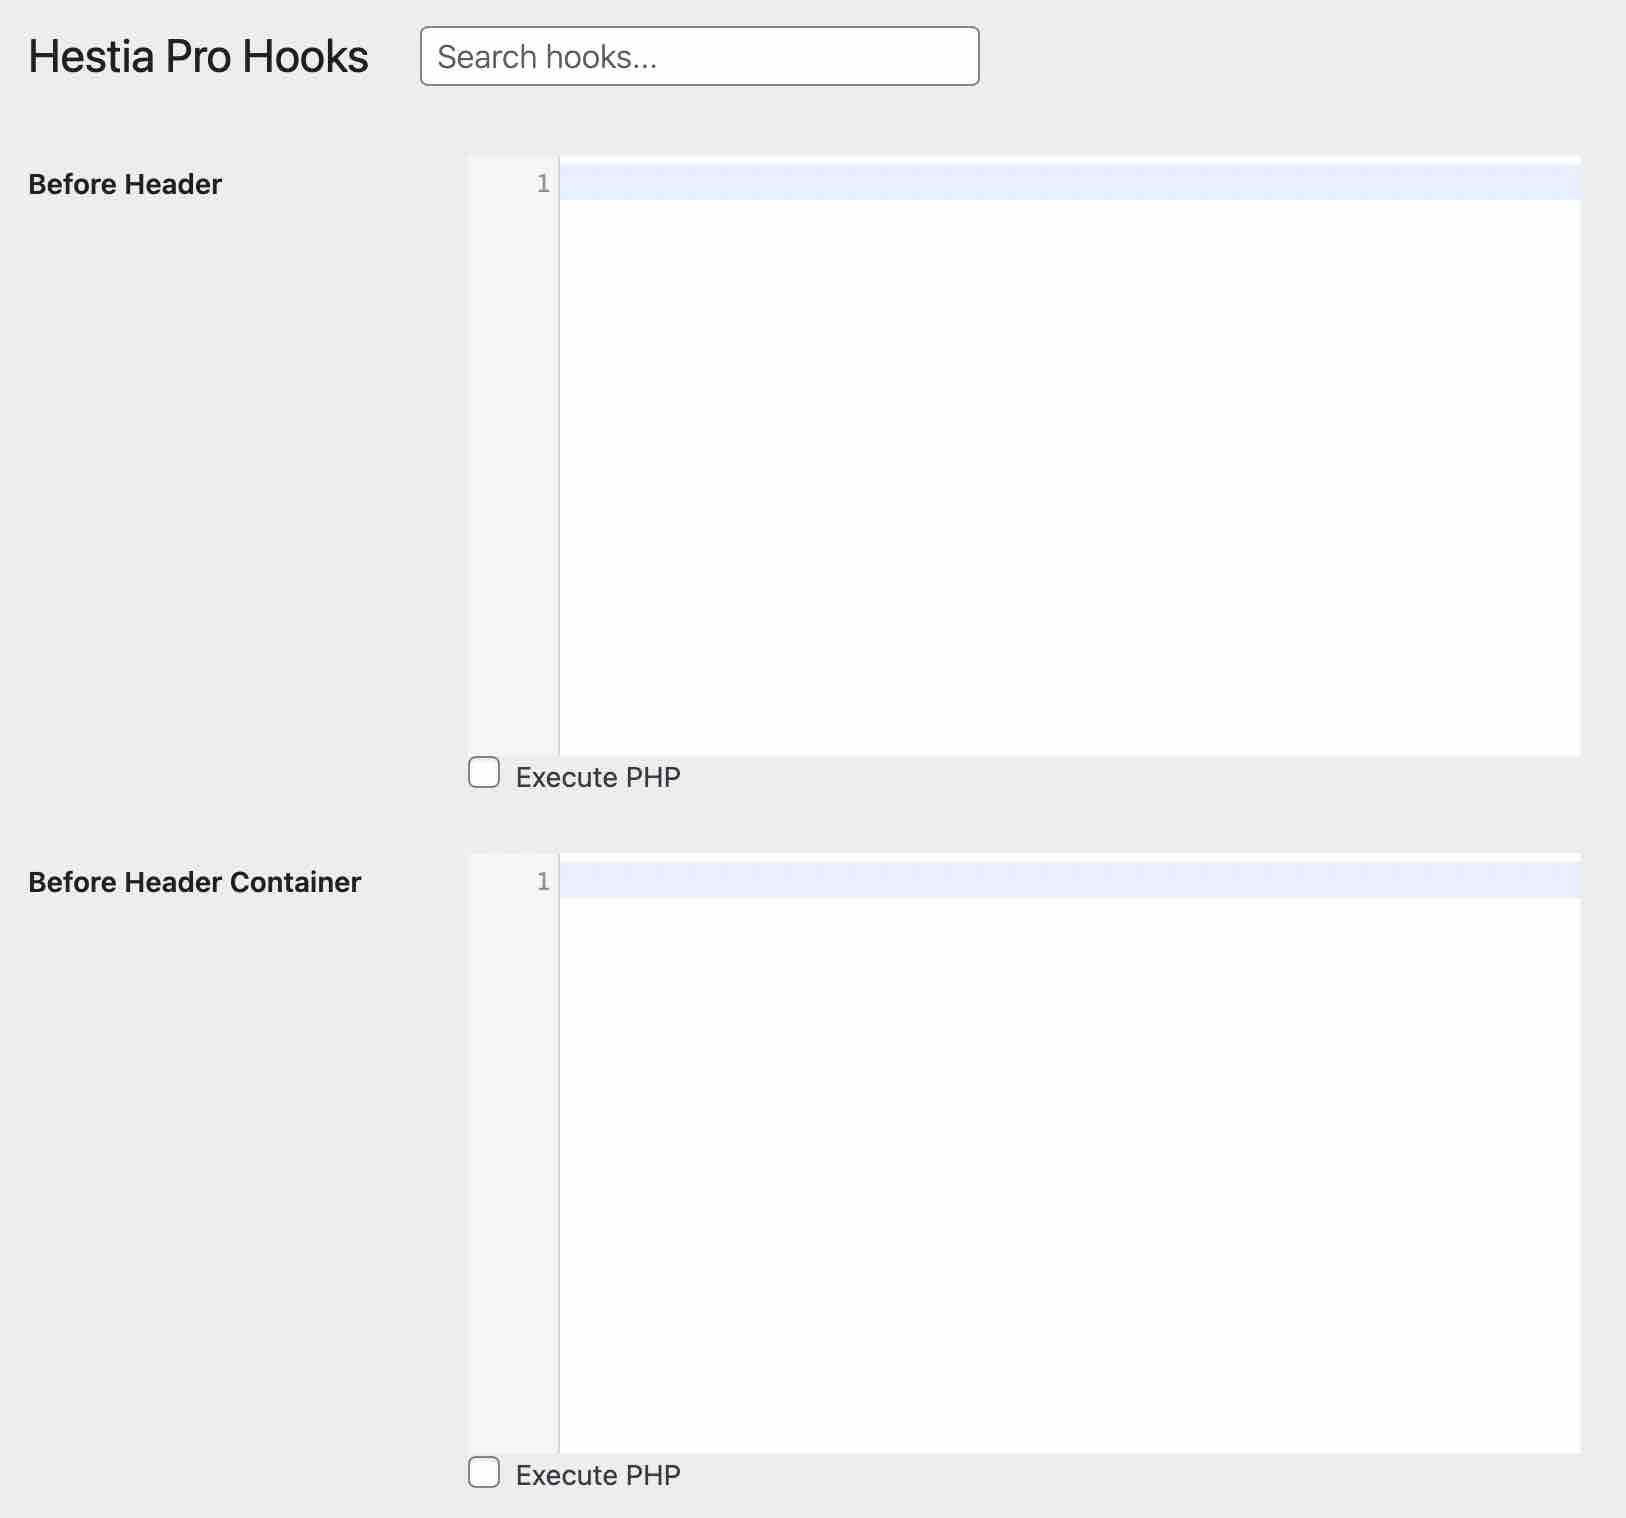 Hestia Pro Hooks before header and before header container.